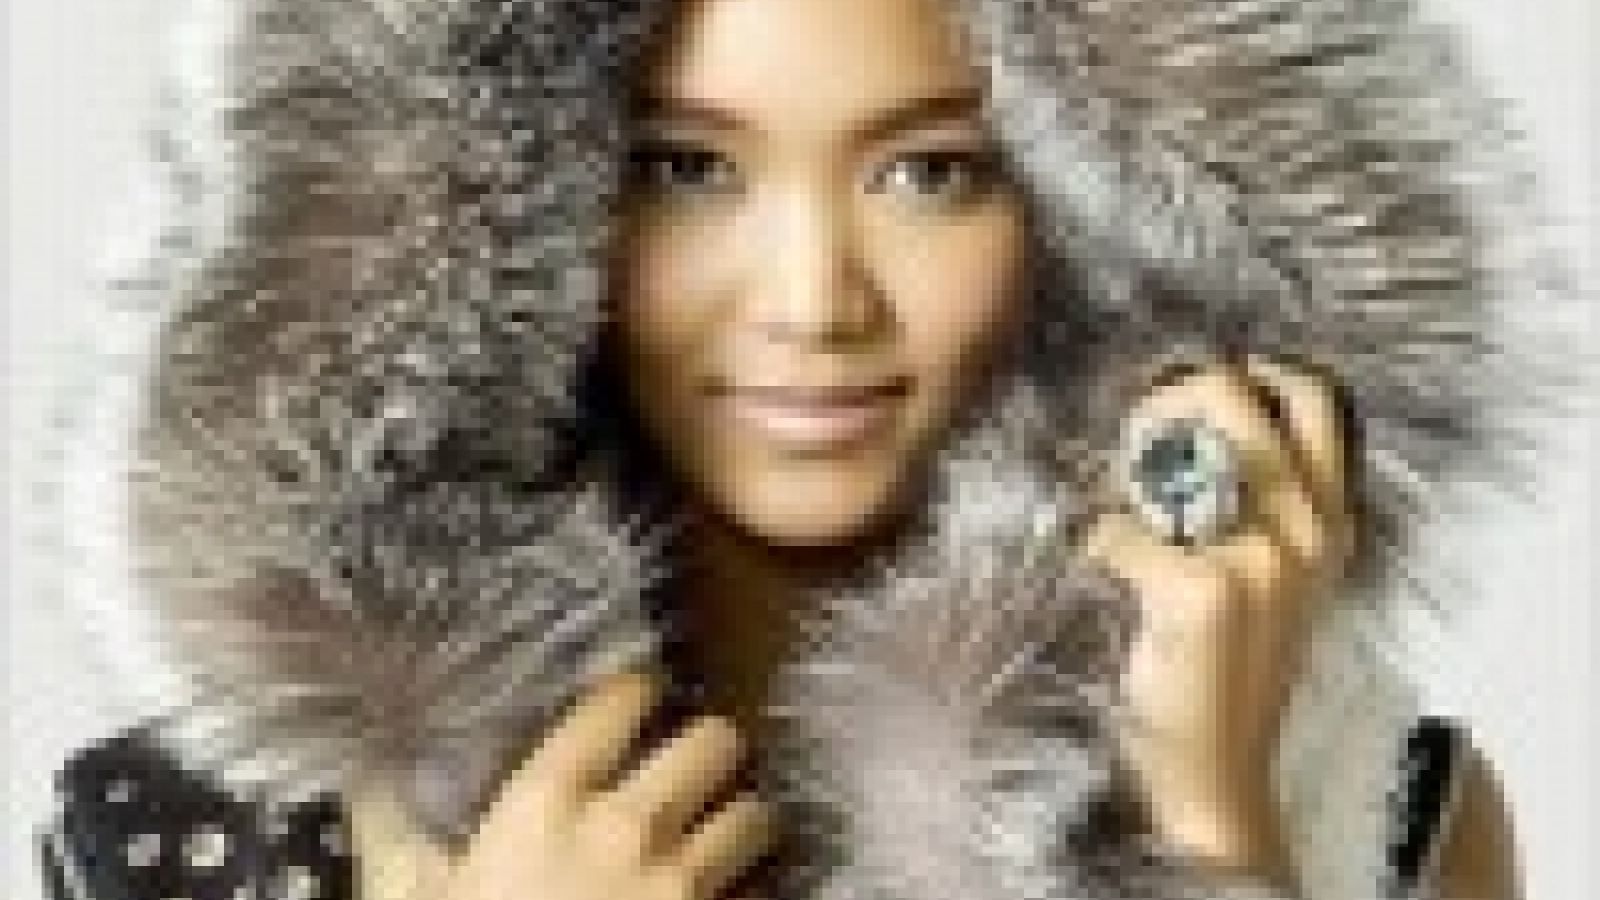 Crystal Kay voyage et fait tourner © 2018 UNIVERSAL MUSIC LLC. All rights reserved.